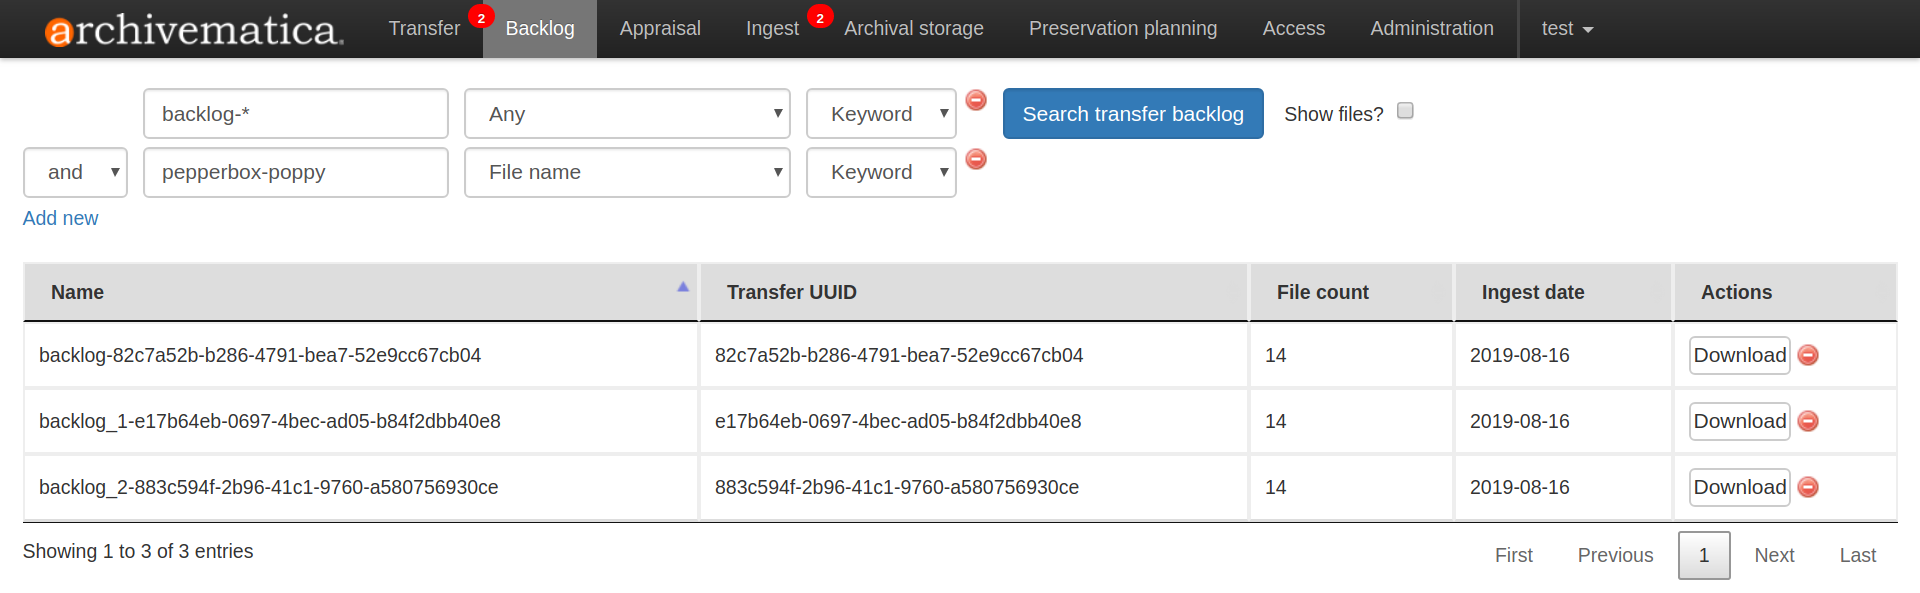 Archivematica backlog tab showing a search for transfers.